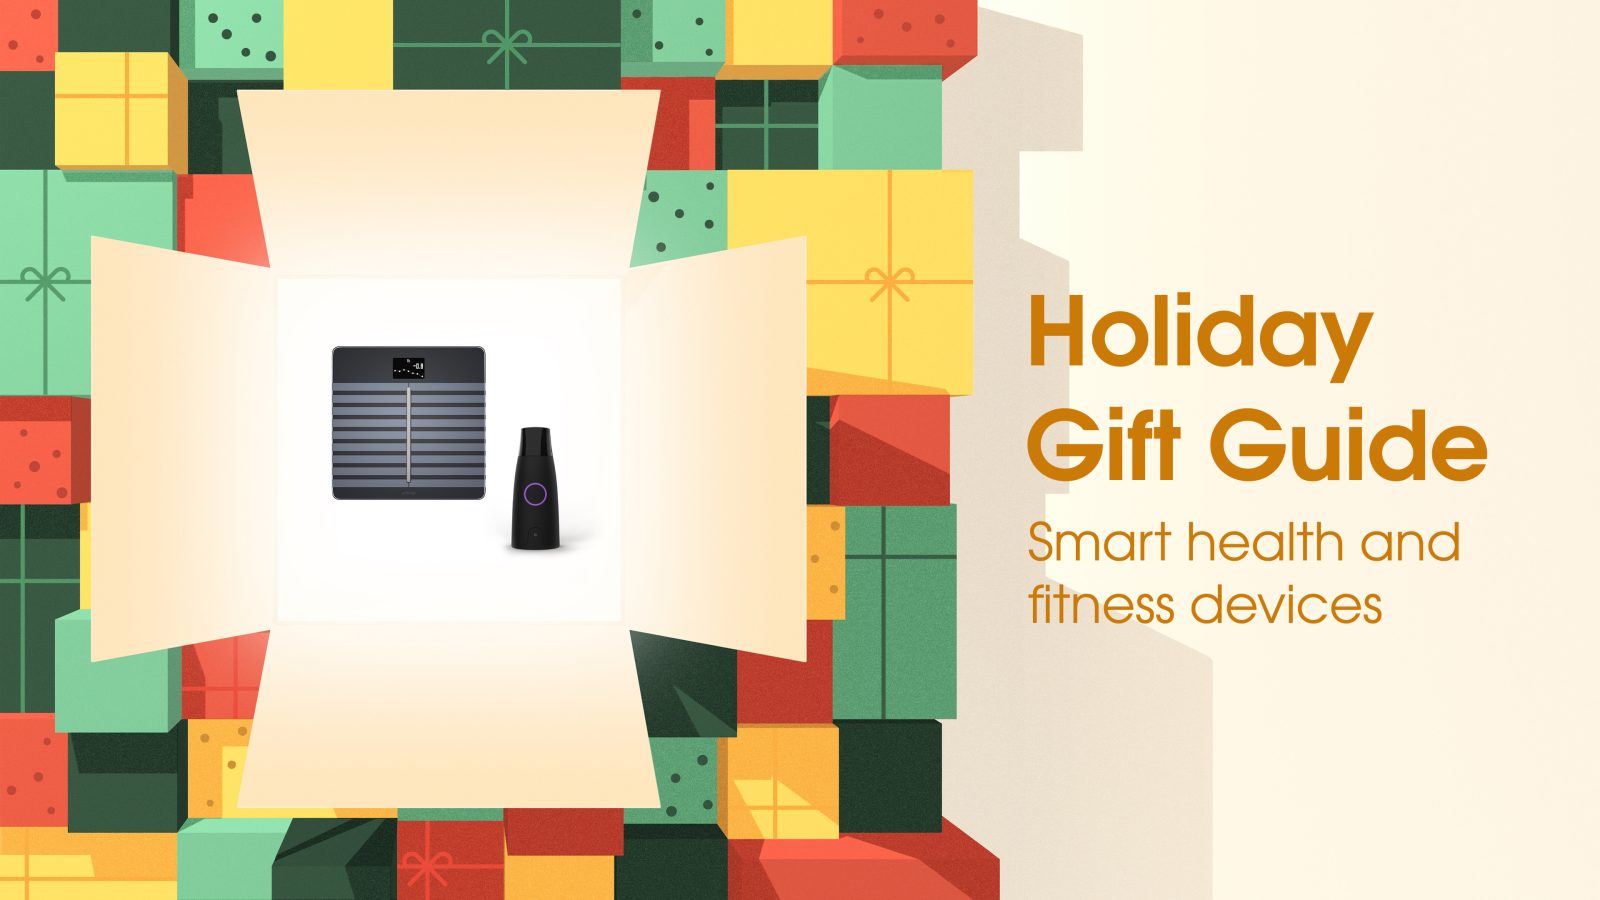 Smart health/fitness devices gift guide 2020